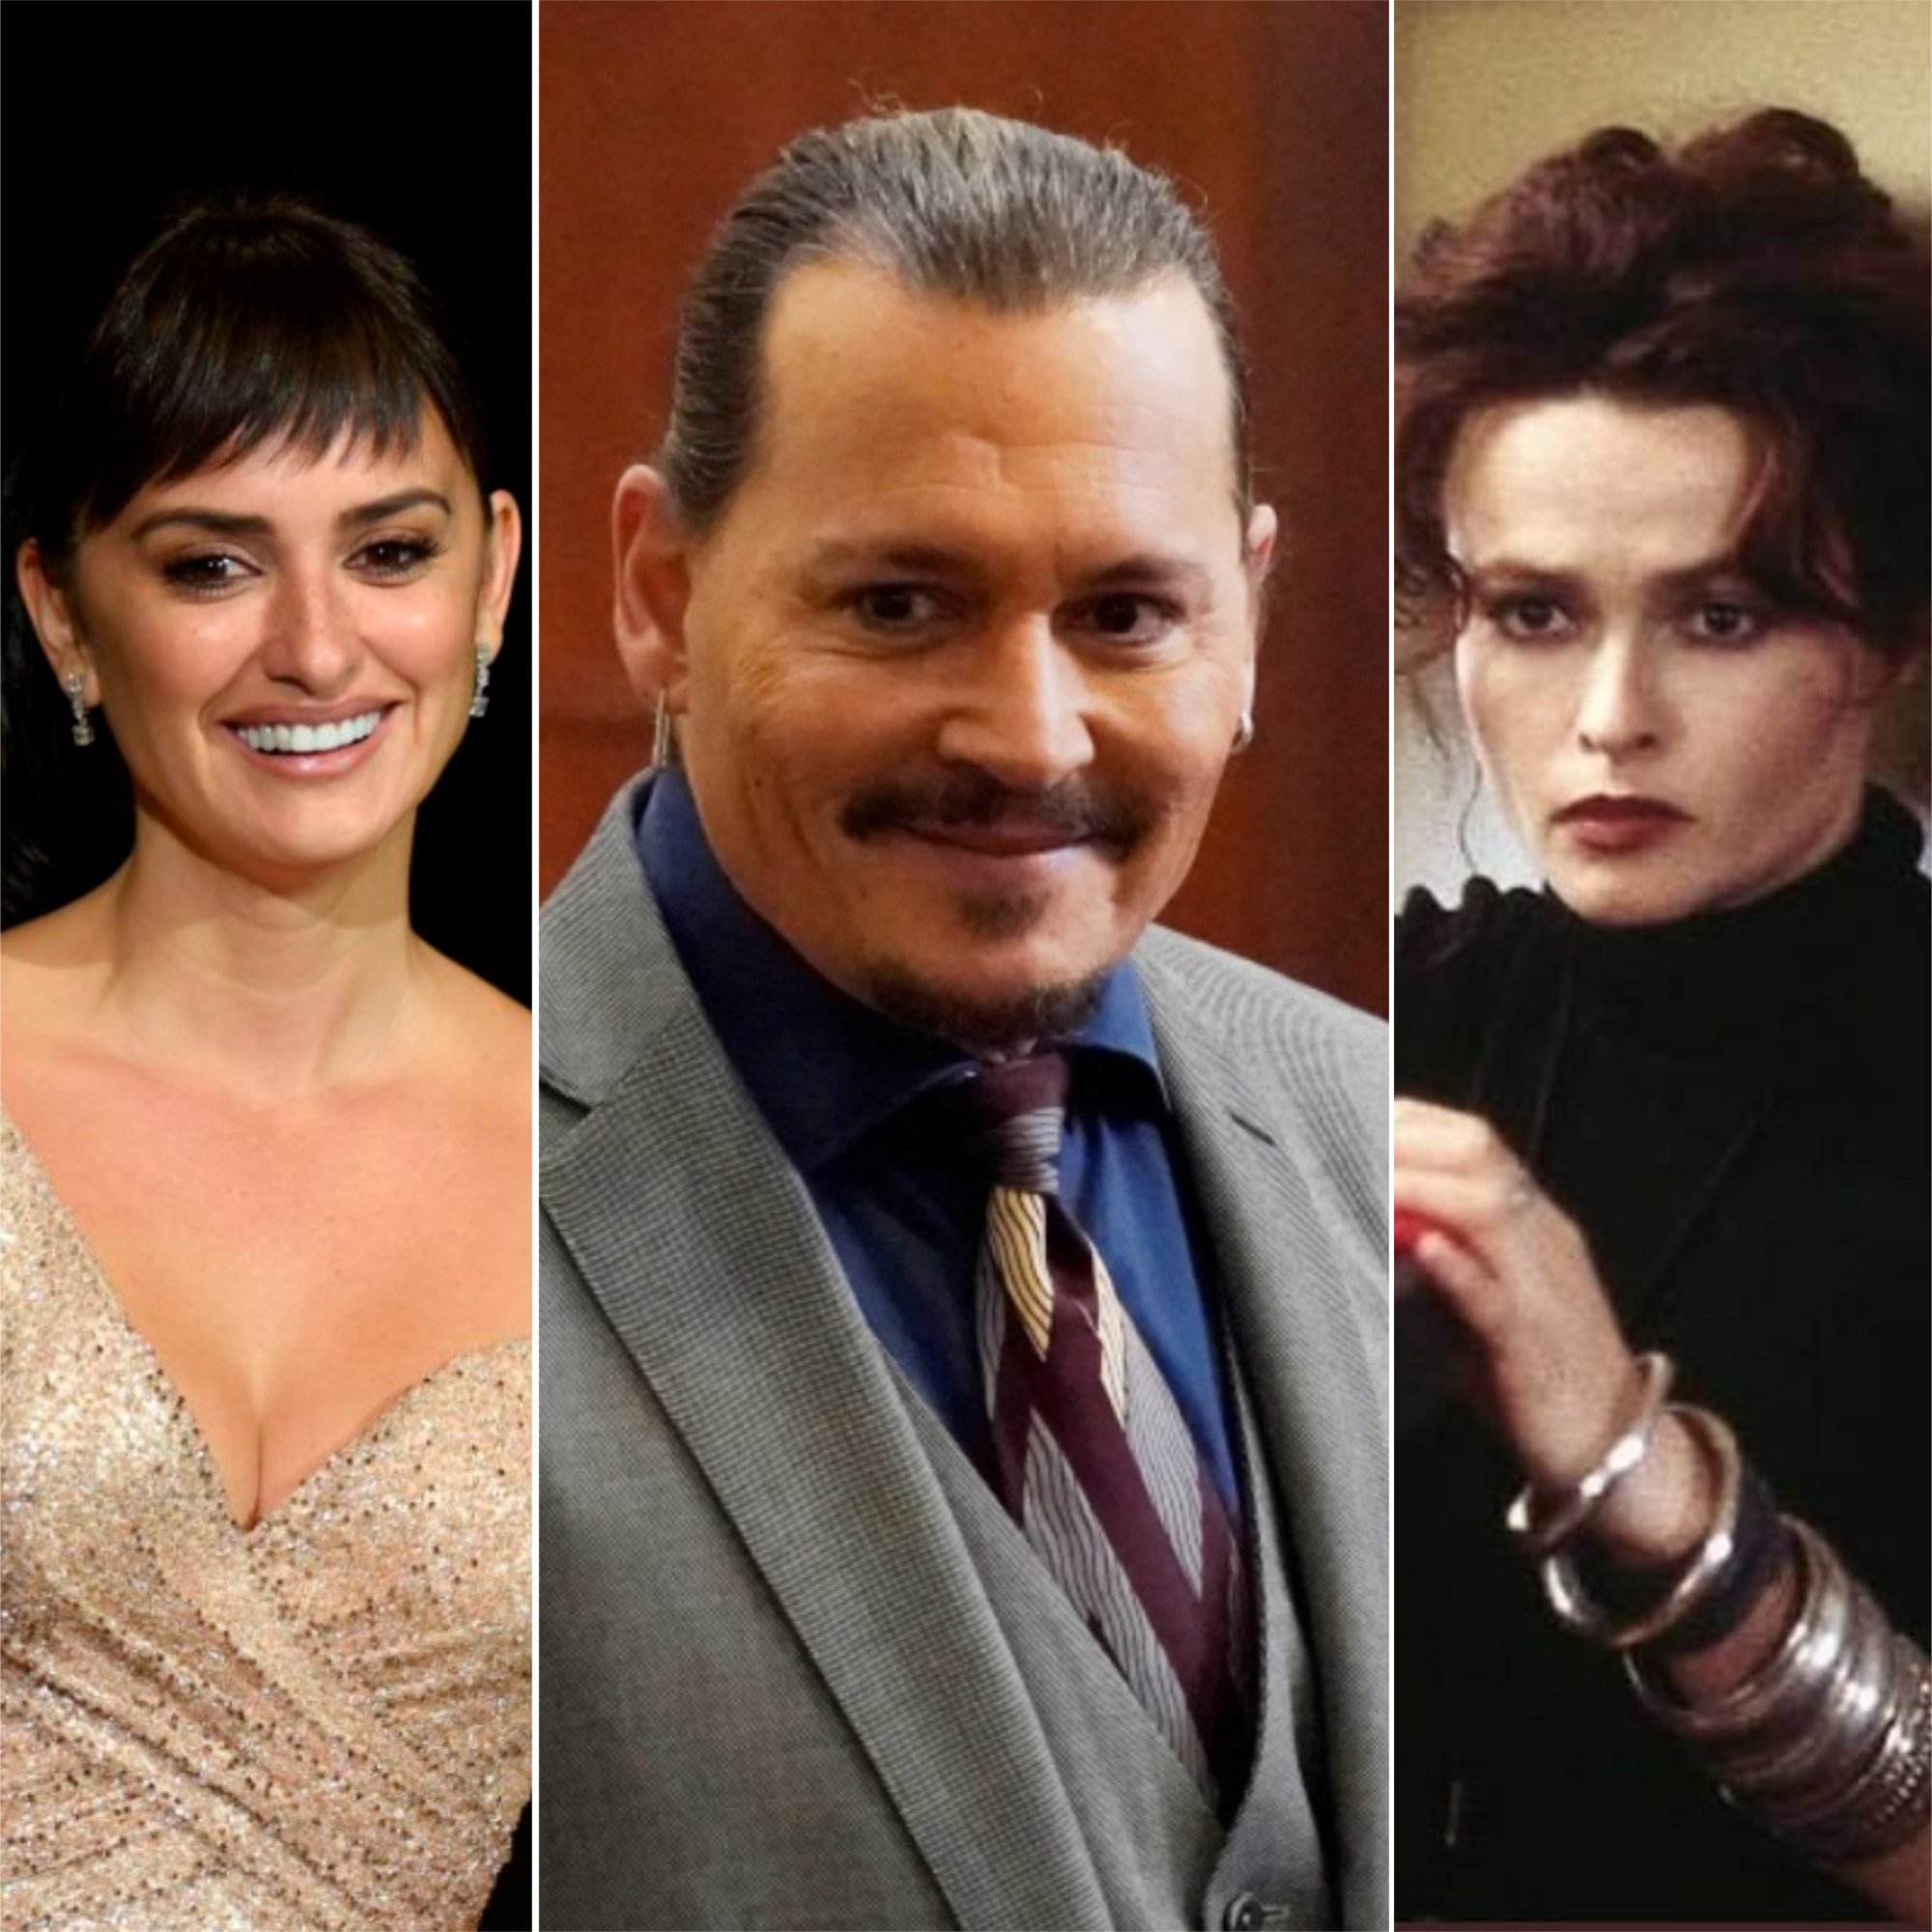 Penélope Cruz and Helena Bonham Carter have both worked with Johnny Depp professionally – and have stuck with him through hard times. Photos: AFP, Reuters, @helenabonhamcarter_offical/Instagram